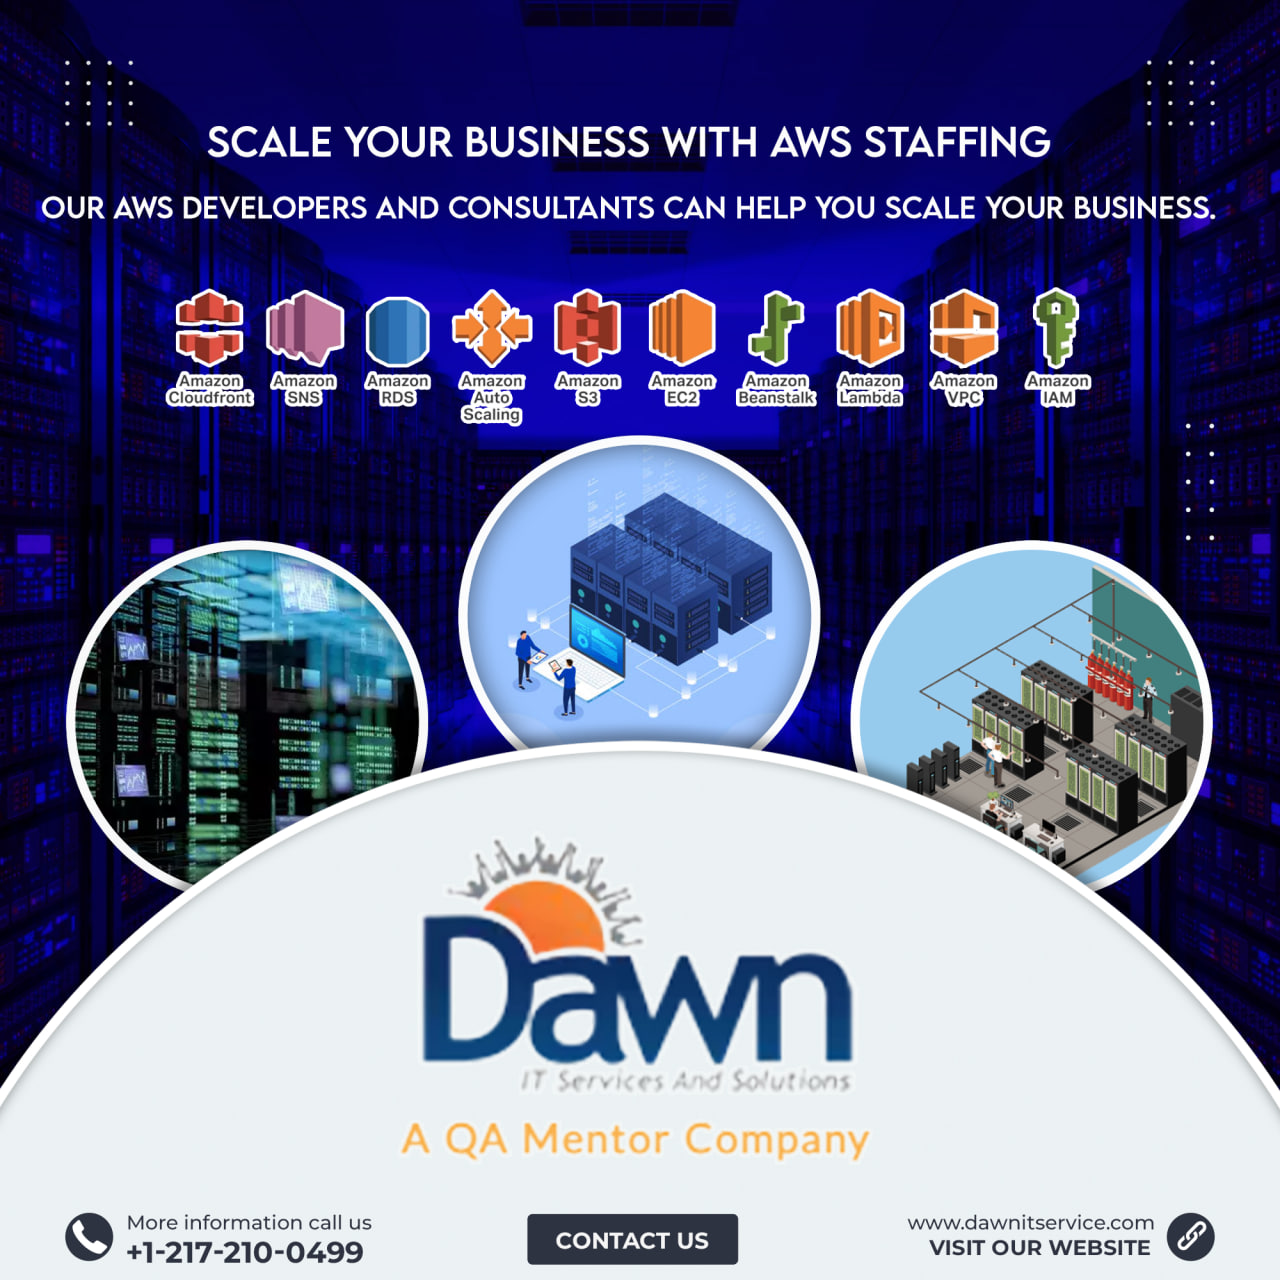 AWS%20workforce%20solutions-Why%20AWS%20Workforce%20Solutions%20are%20Key%20to%20Your%20Business%20Success-feb-2023.jpg